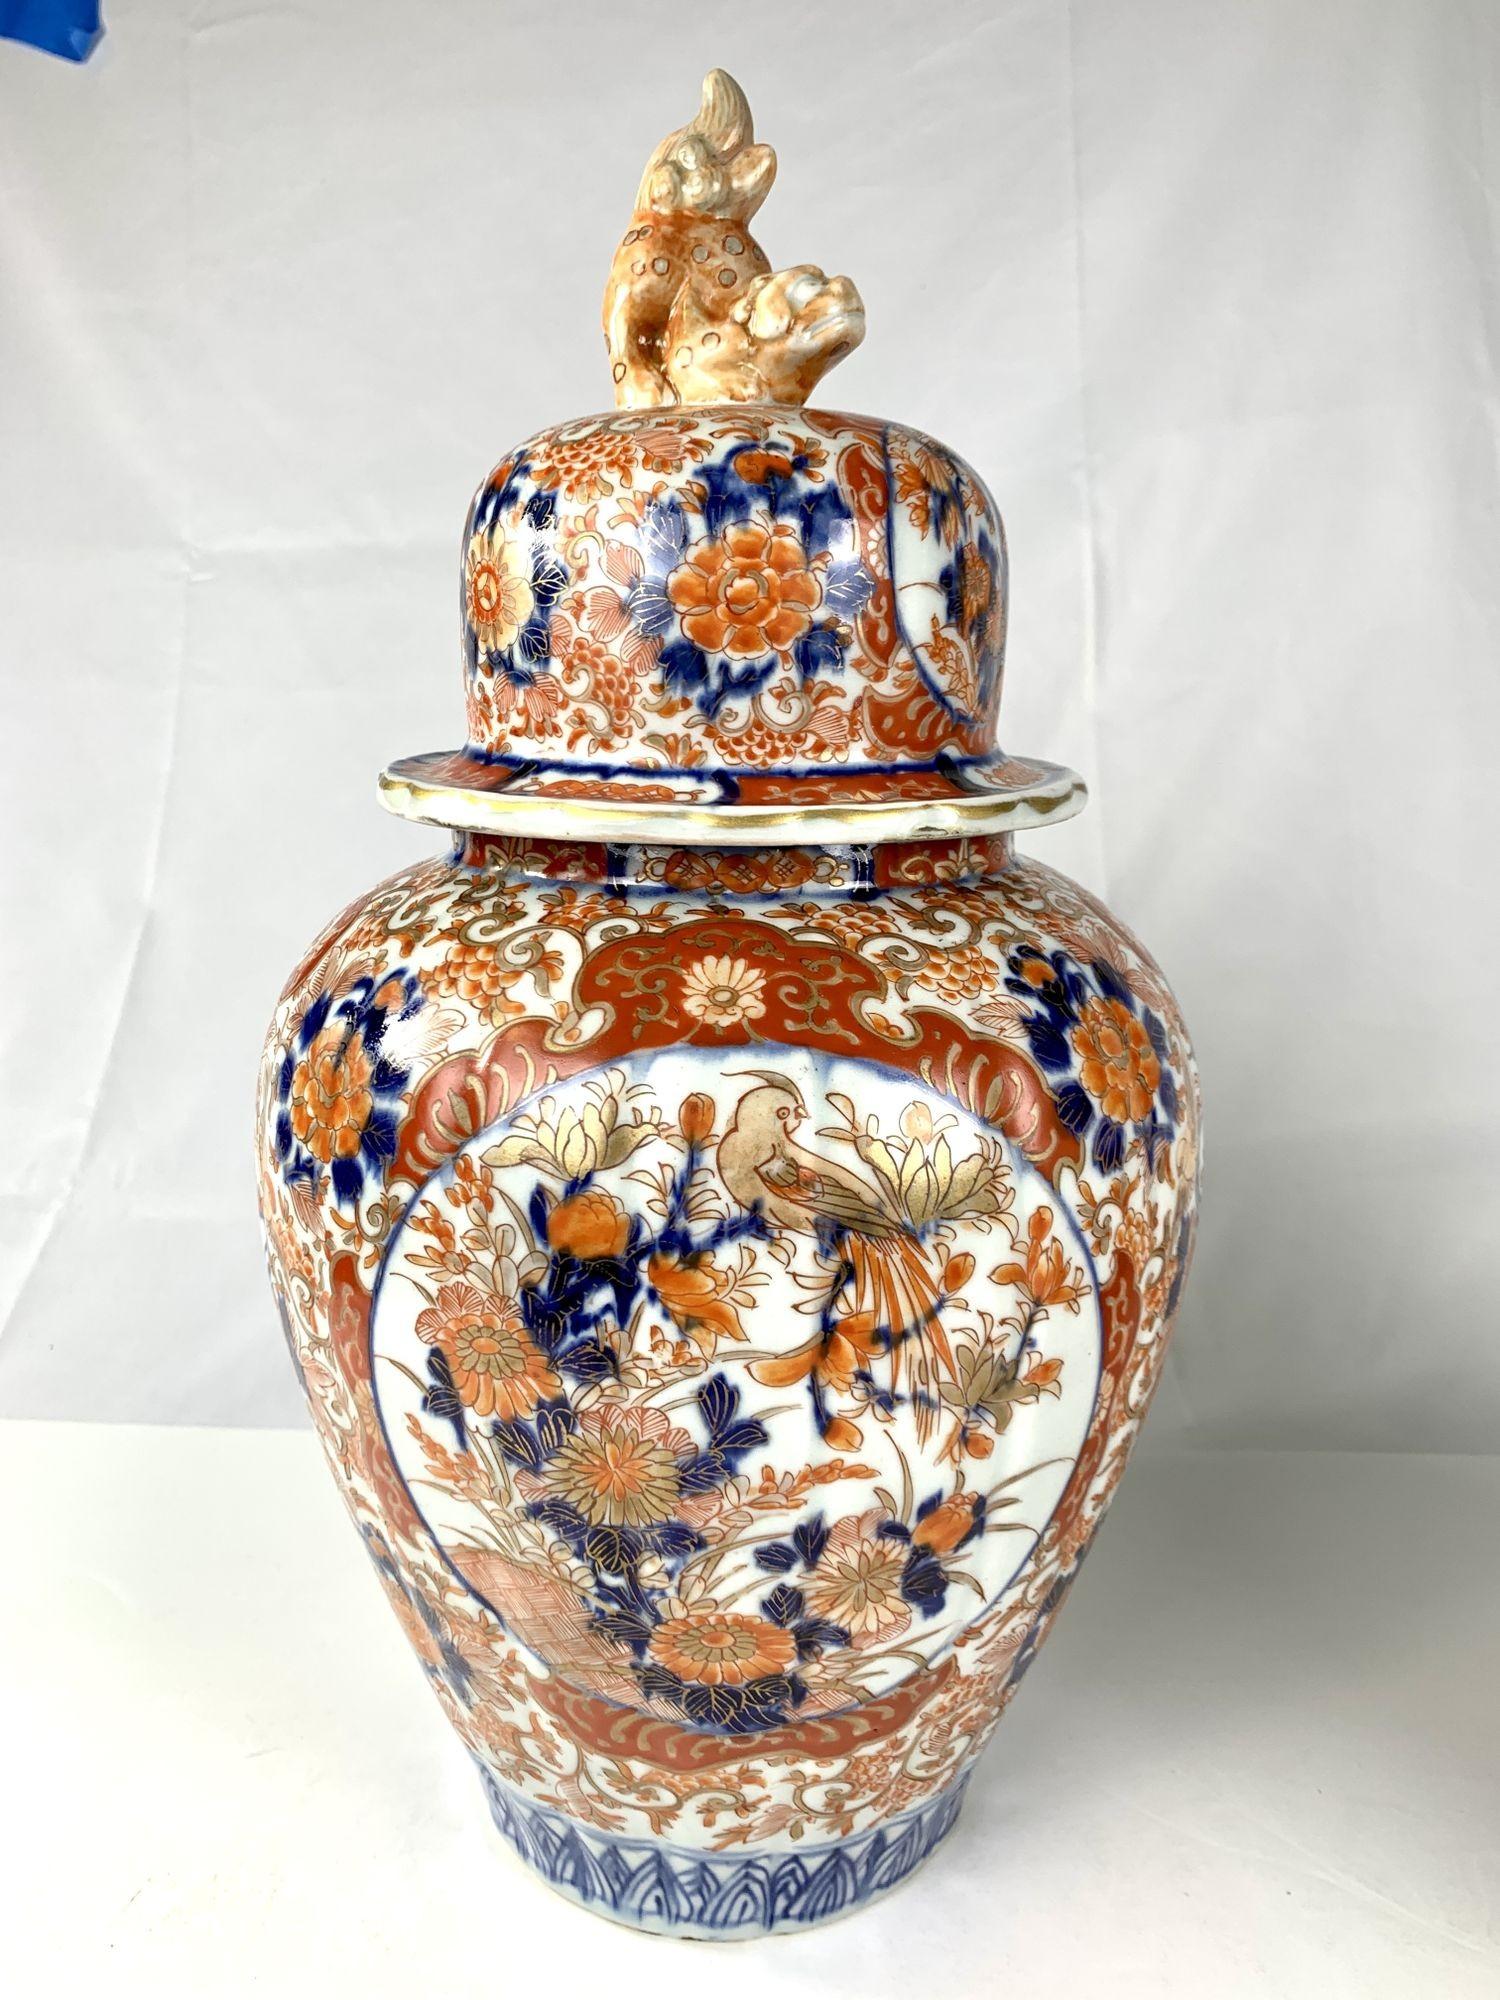 This pair of hand-painted, antique Japanese Imari porcelain jars dates to the late 19th century, circa 1880.
The jars are decorated with a traditional Japanese Imari motif of birds and flowers painted in enamels of intense iron red, deep cobalt